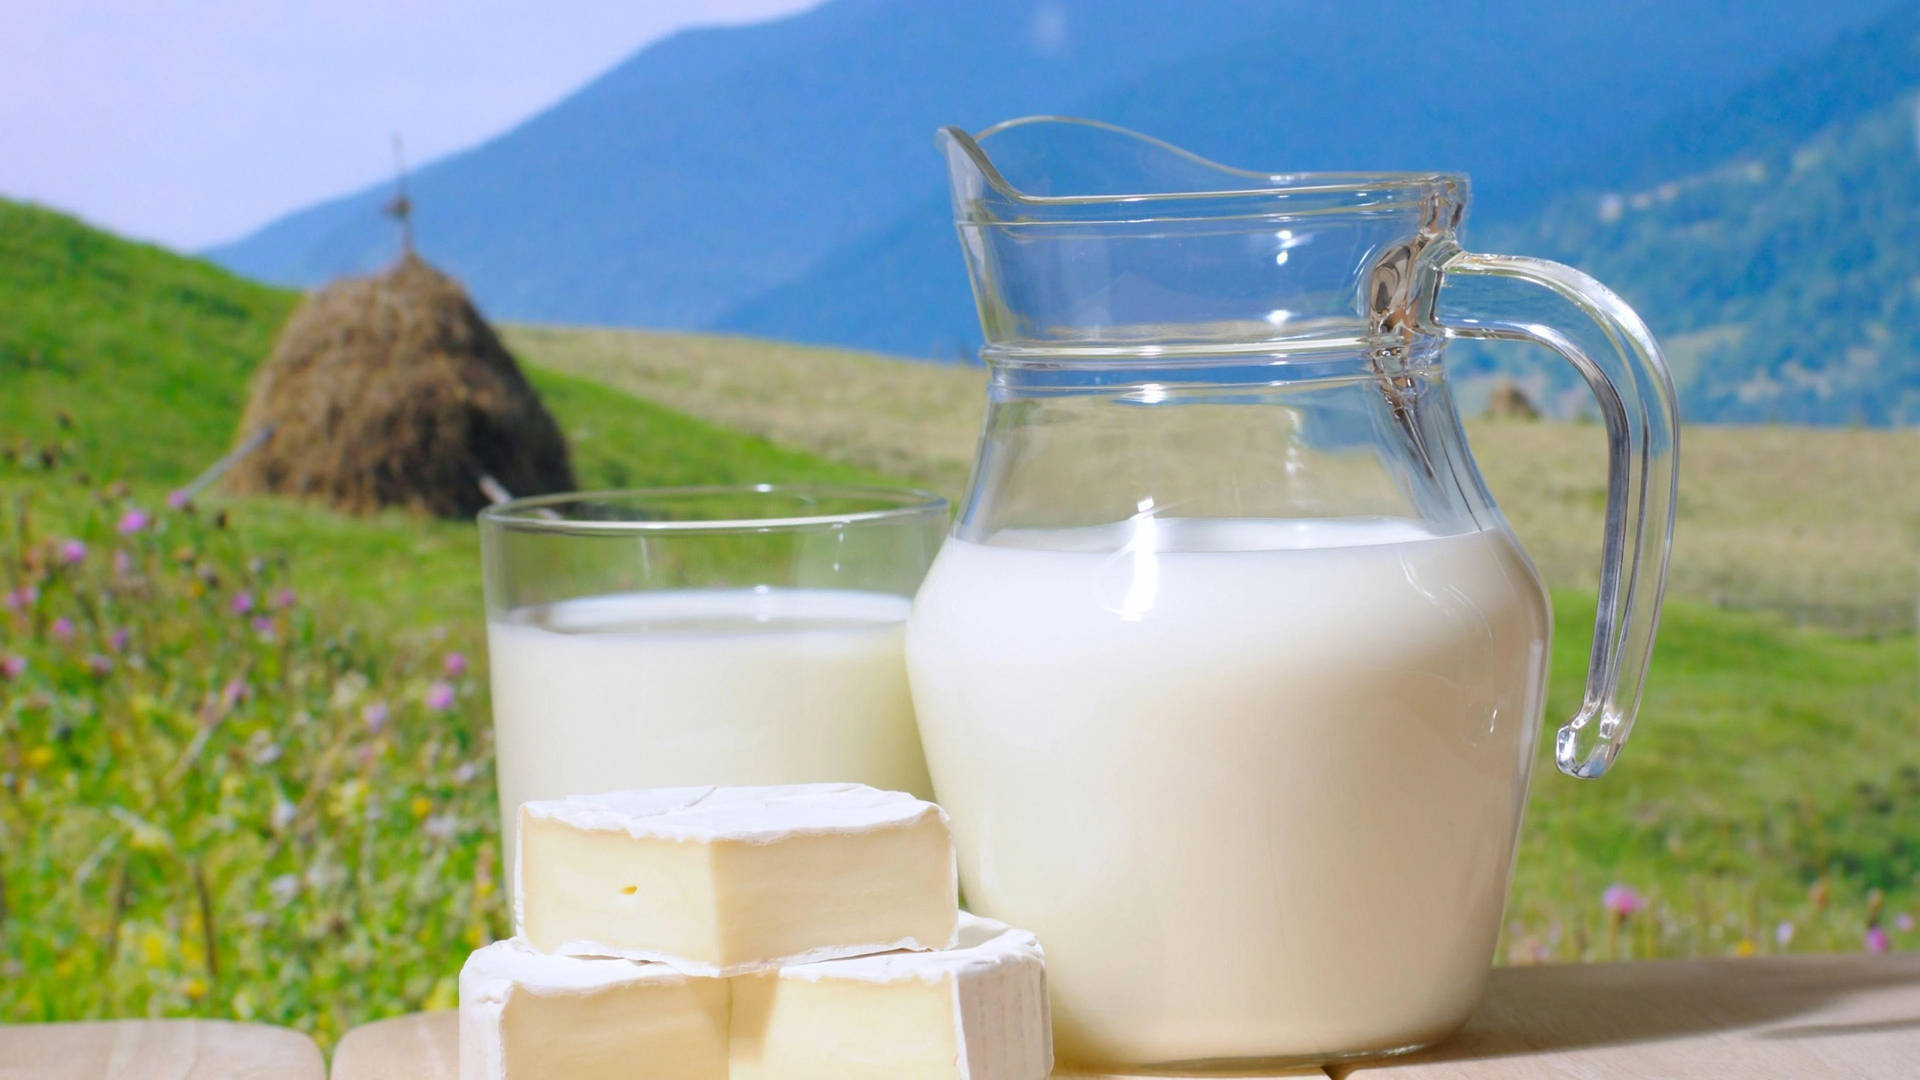 Milk And Cheese At A Pasture